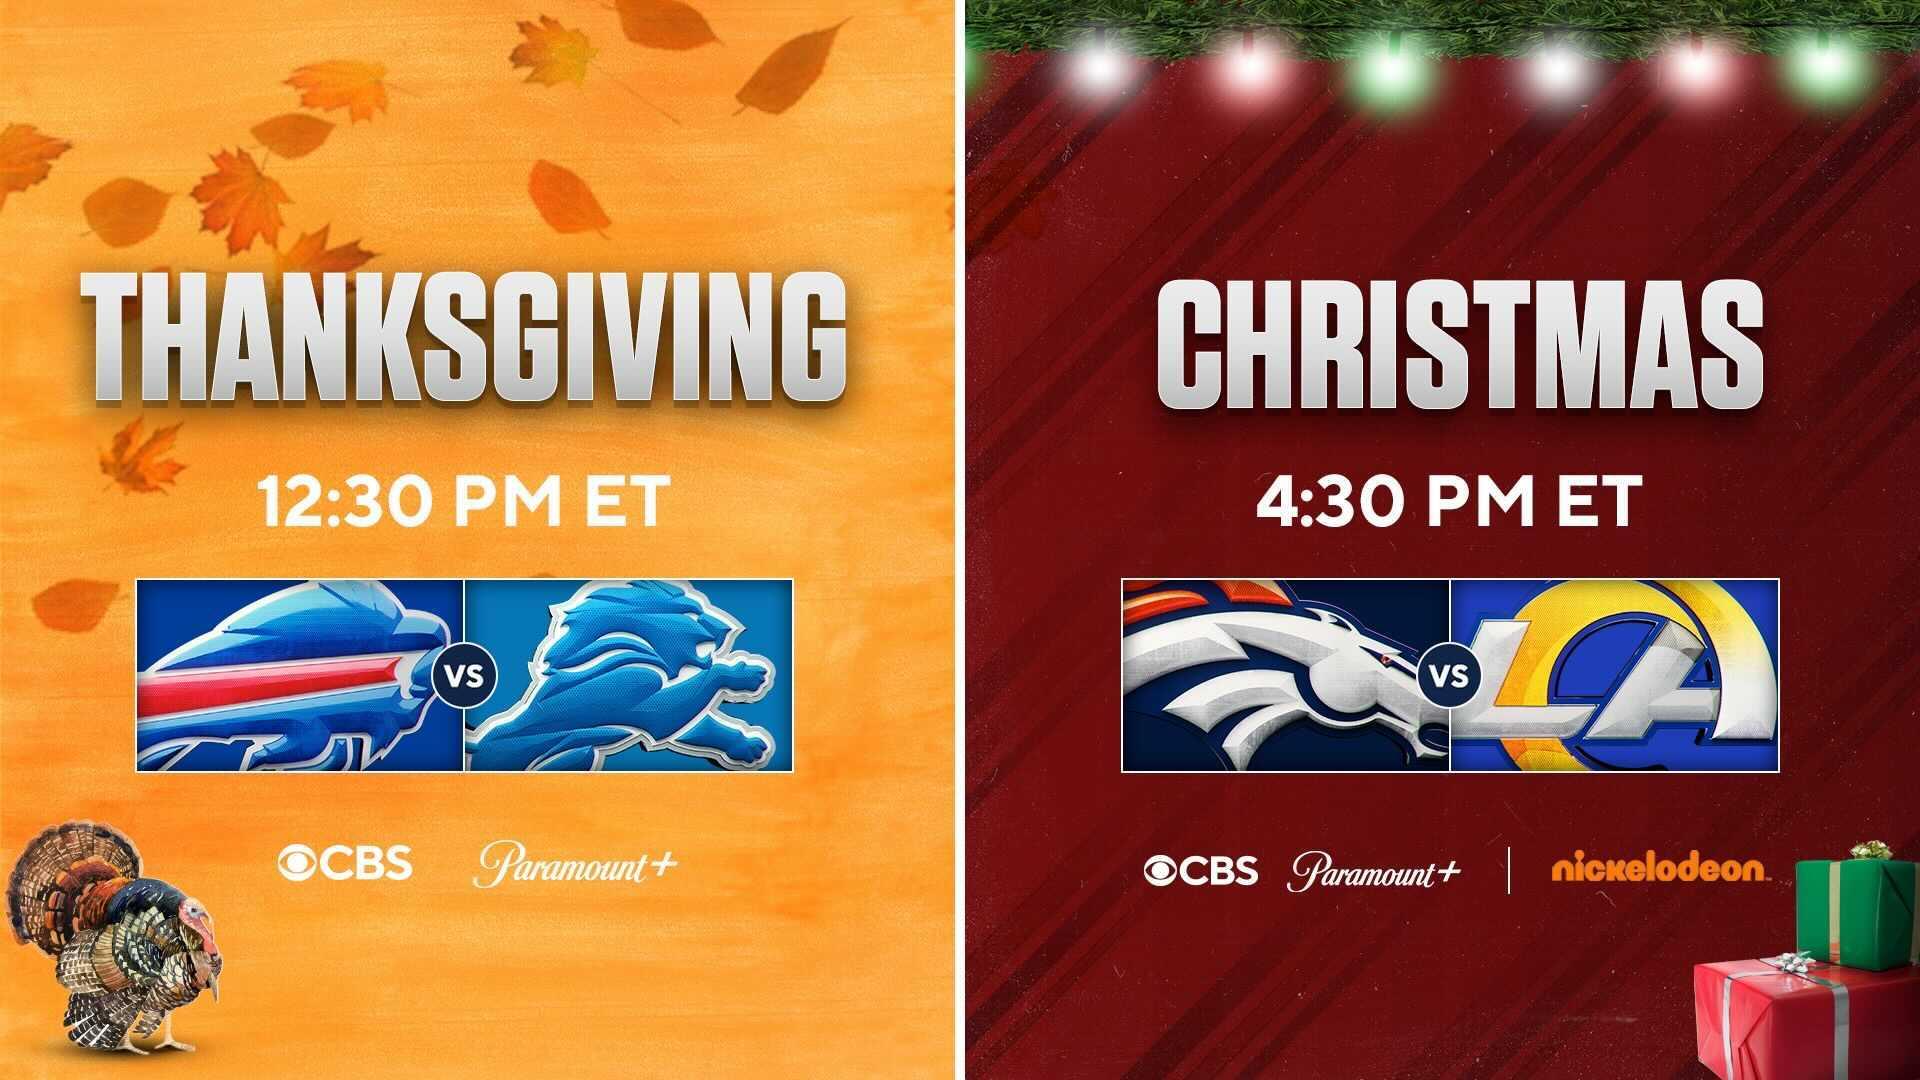 Paramount Press Express  CBS SPORTS UNVEILS 2022 “NFL ON CBS” SCHEDULE  FEATURING MARQUEE NATIONAL GAMES, EPIC PLAYOFF REMATCHES, TOP QUARTERBACKS  AND HOLIDAY CONTESTS ON THANKSGIVING AND CHRISTMAS